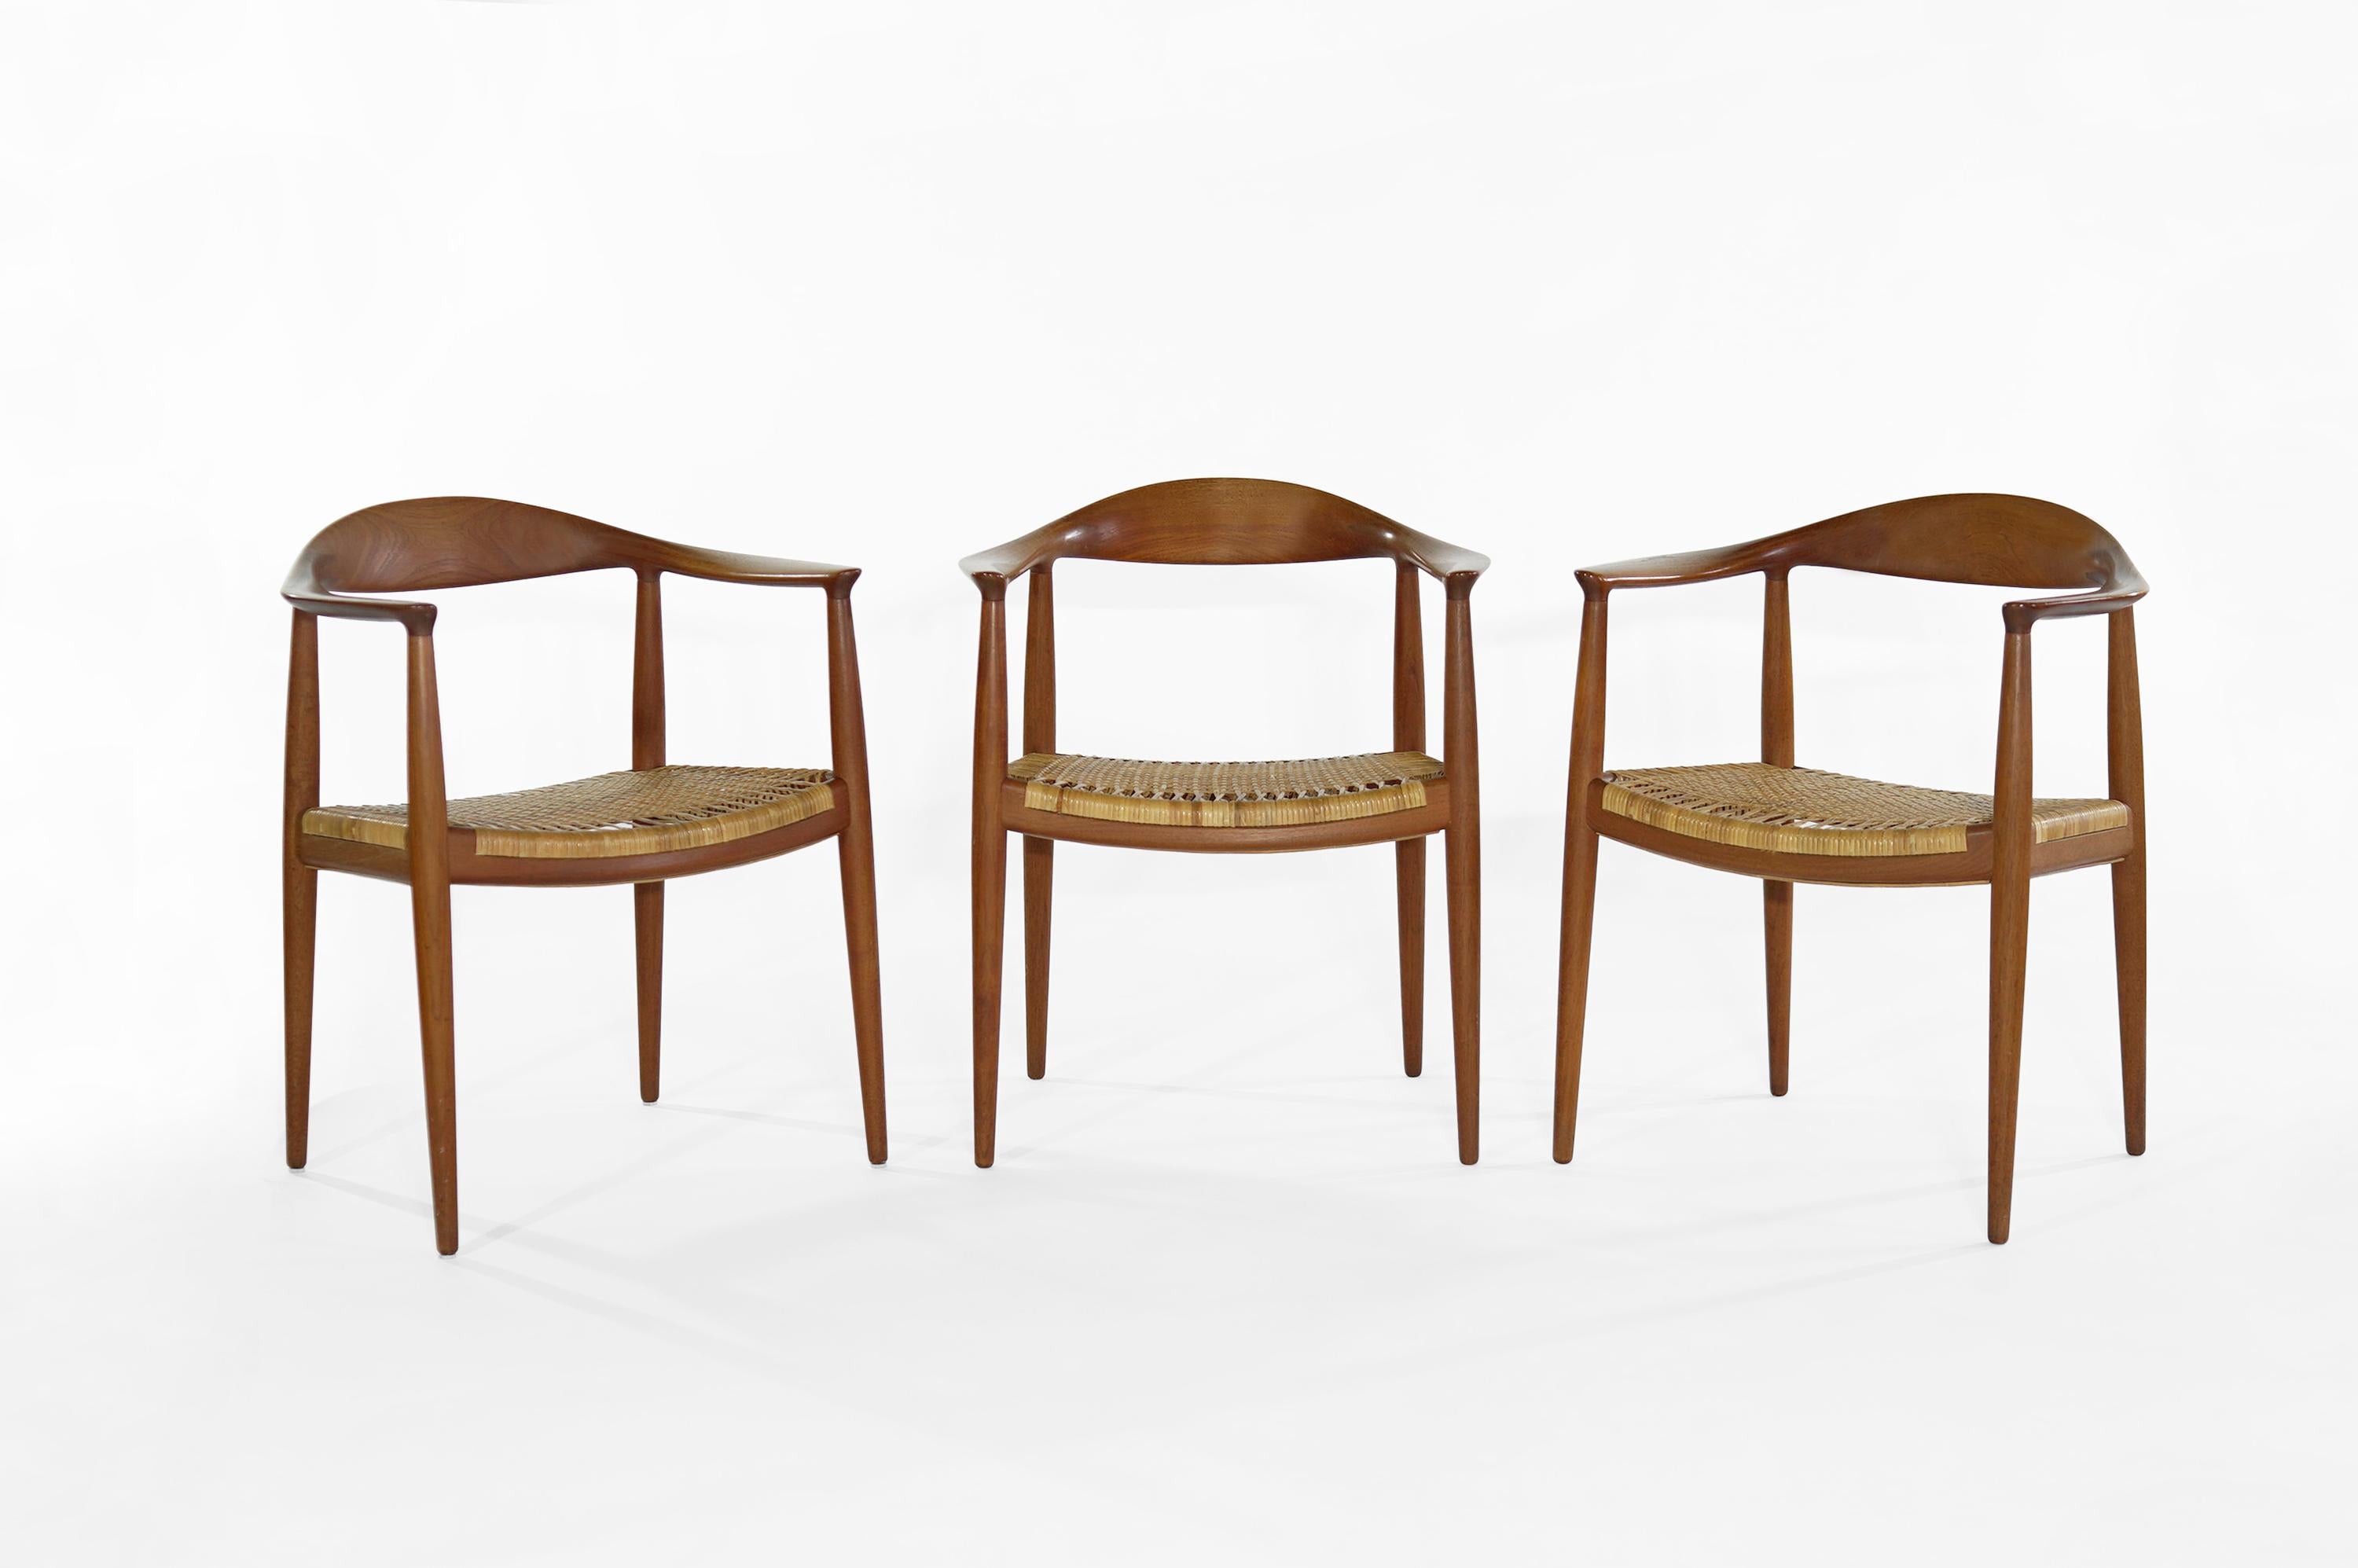 Hans Wegner's iconic round chair, model JH 501, made by Johannes Hansen, Denmark, 1949.
Commonly known as 'The Chair', these are an early teak version with cane seat. Branded with makers mark. Priced as a set.